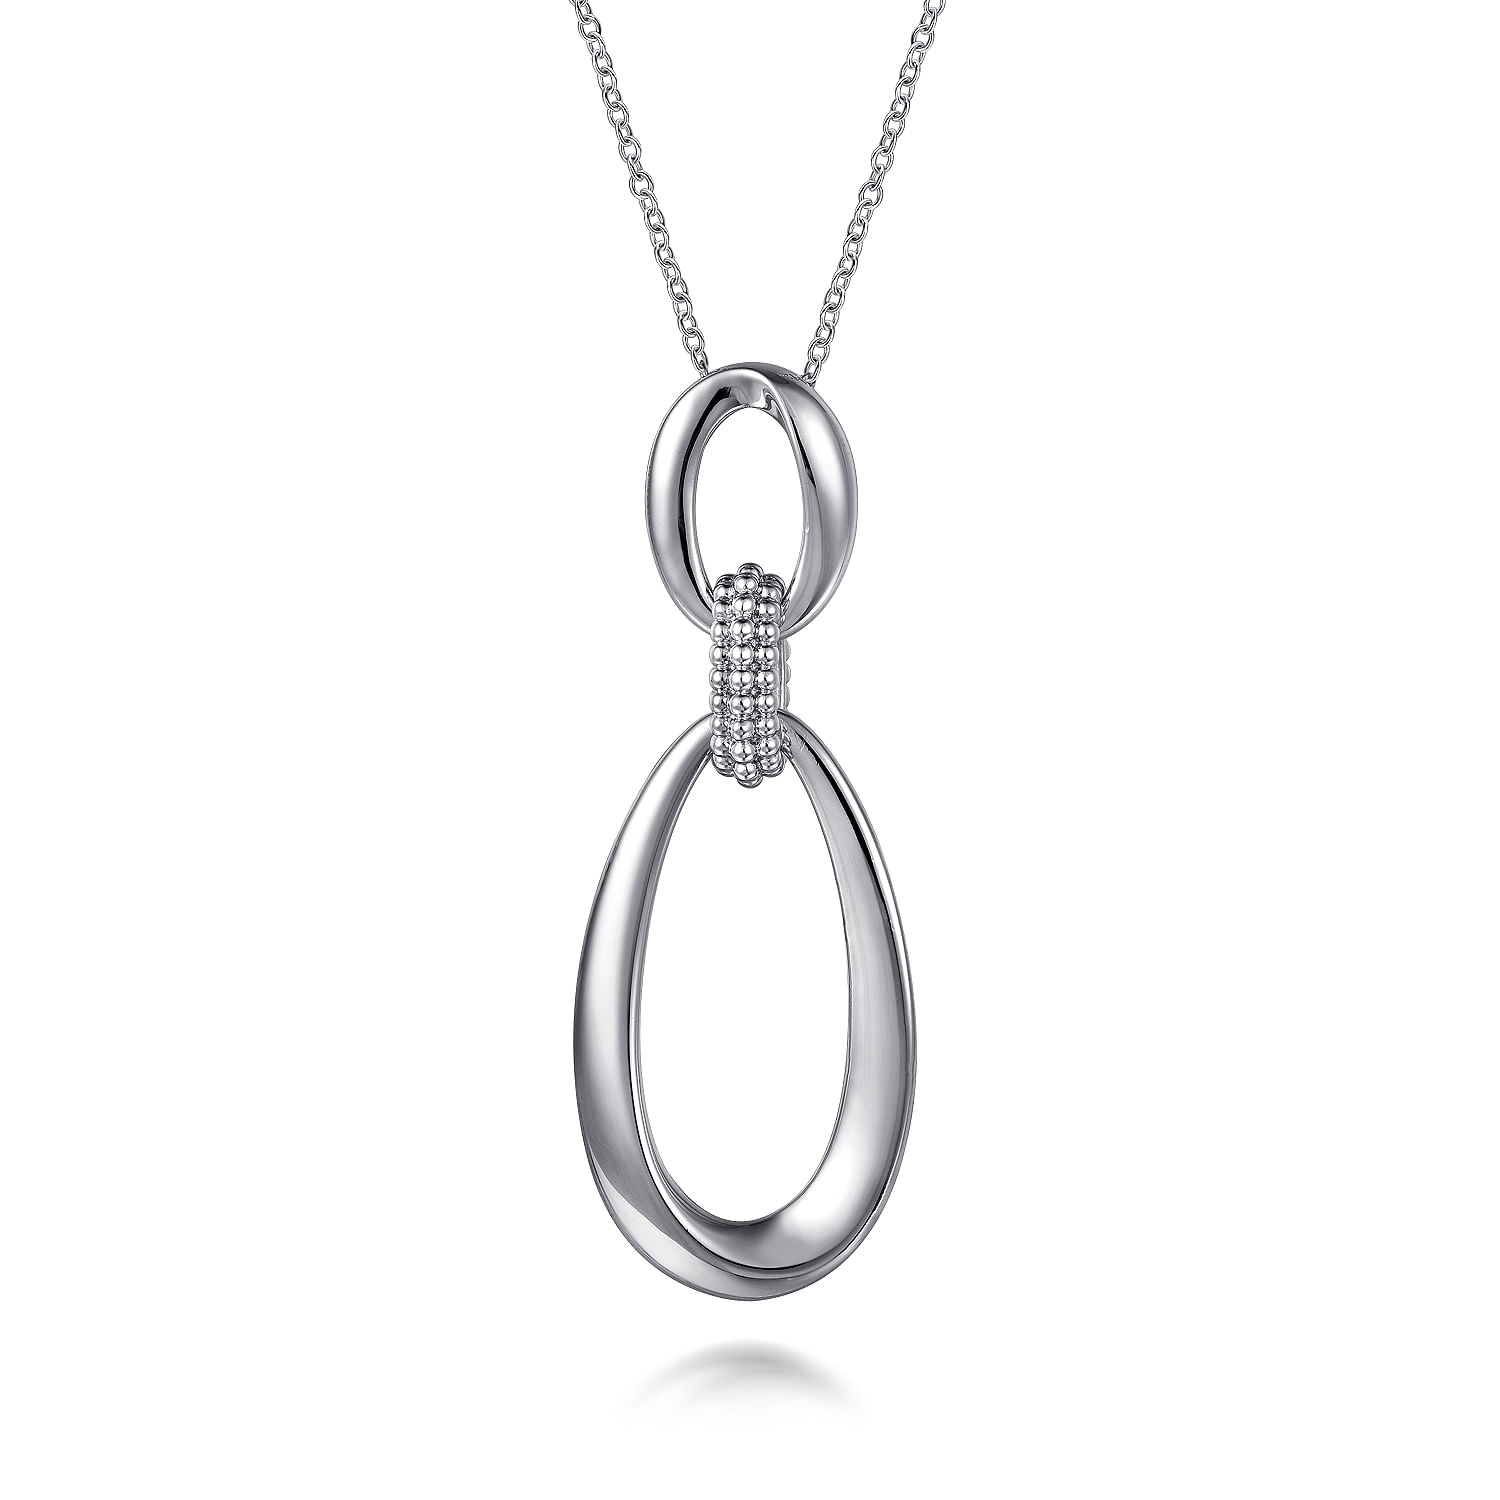 925 Sterling Silver Oval Link Chain Necklace with Bujukan Connectors, Shop  925 Silver Bujukan Necklaces